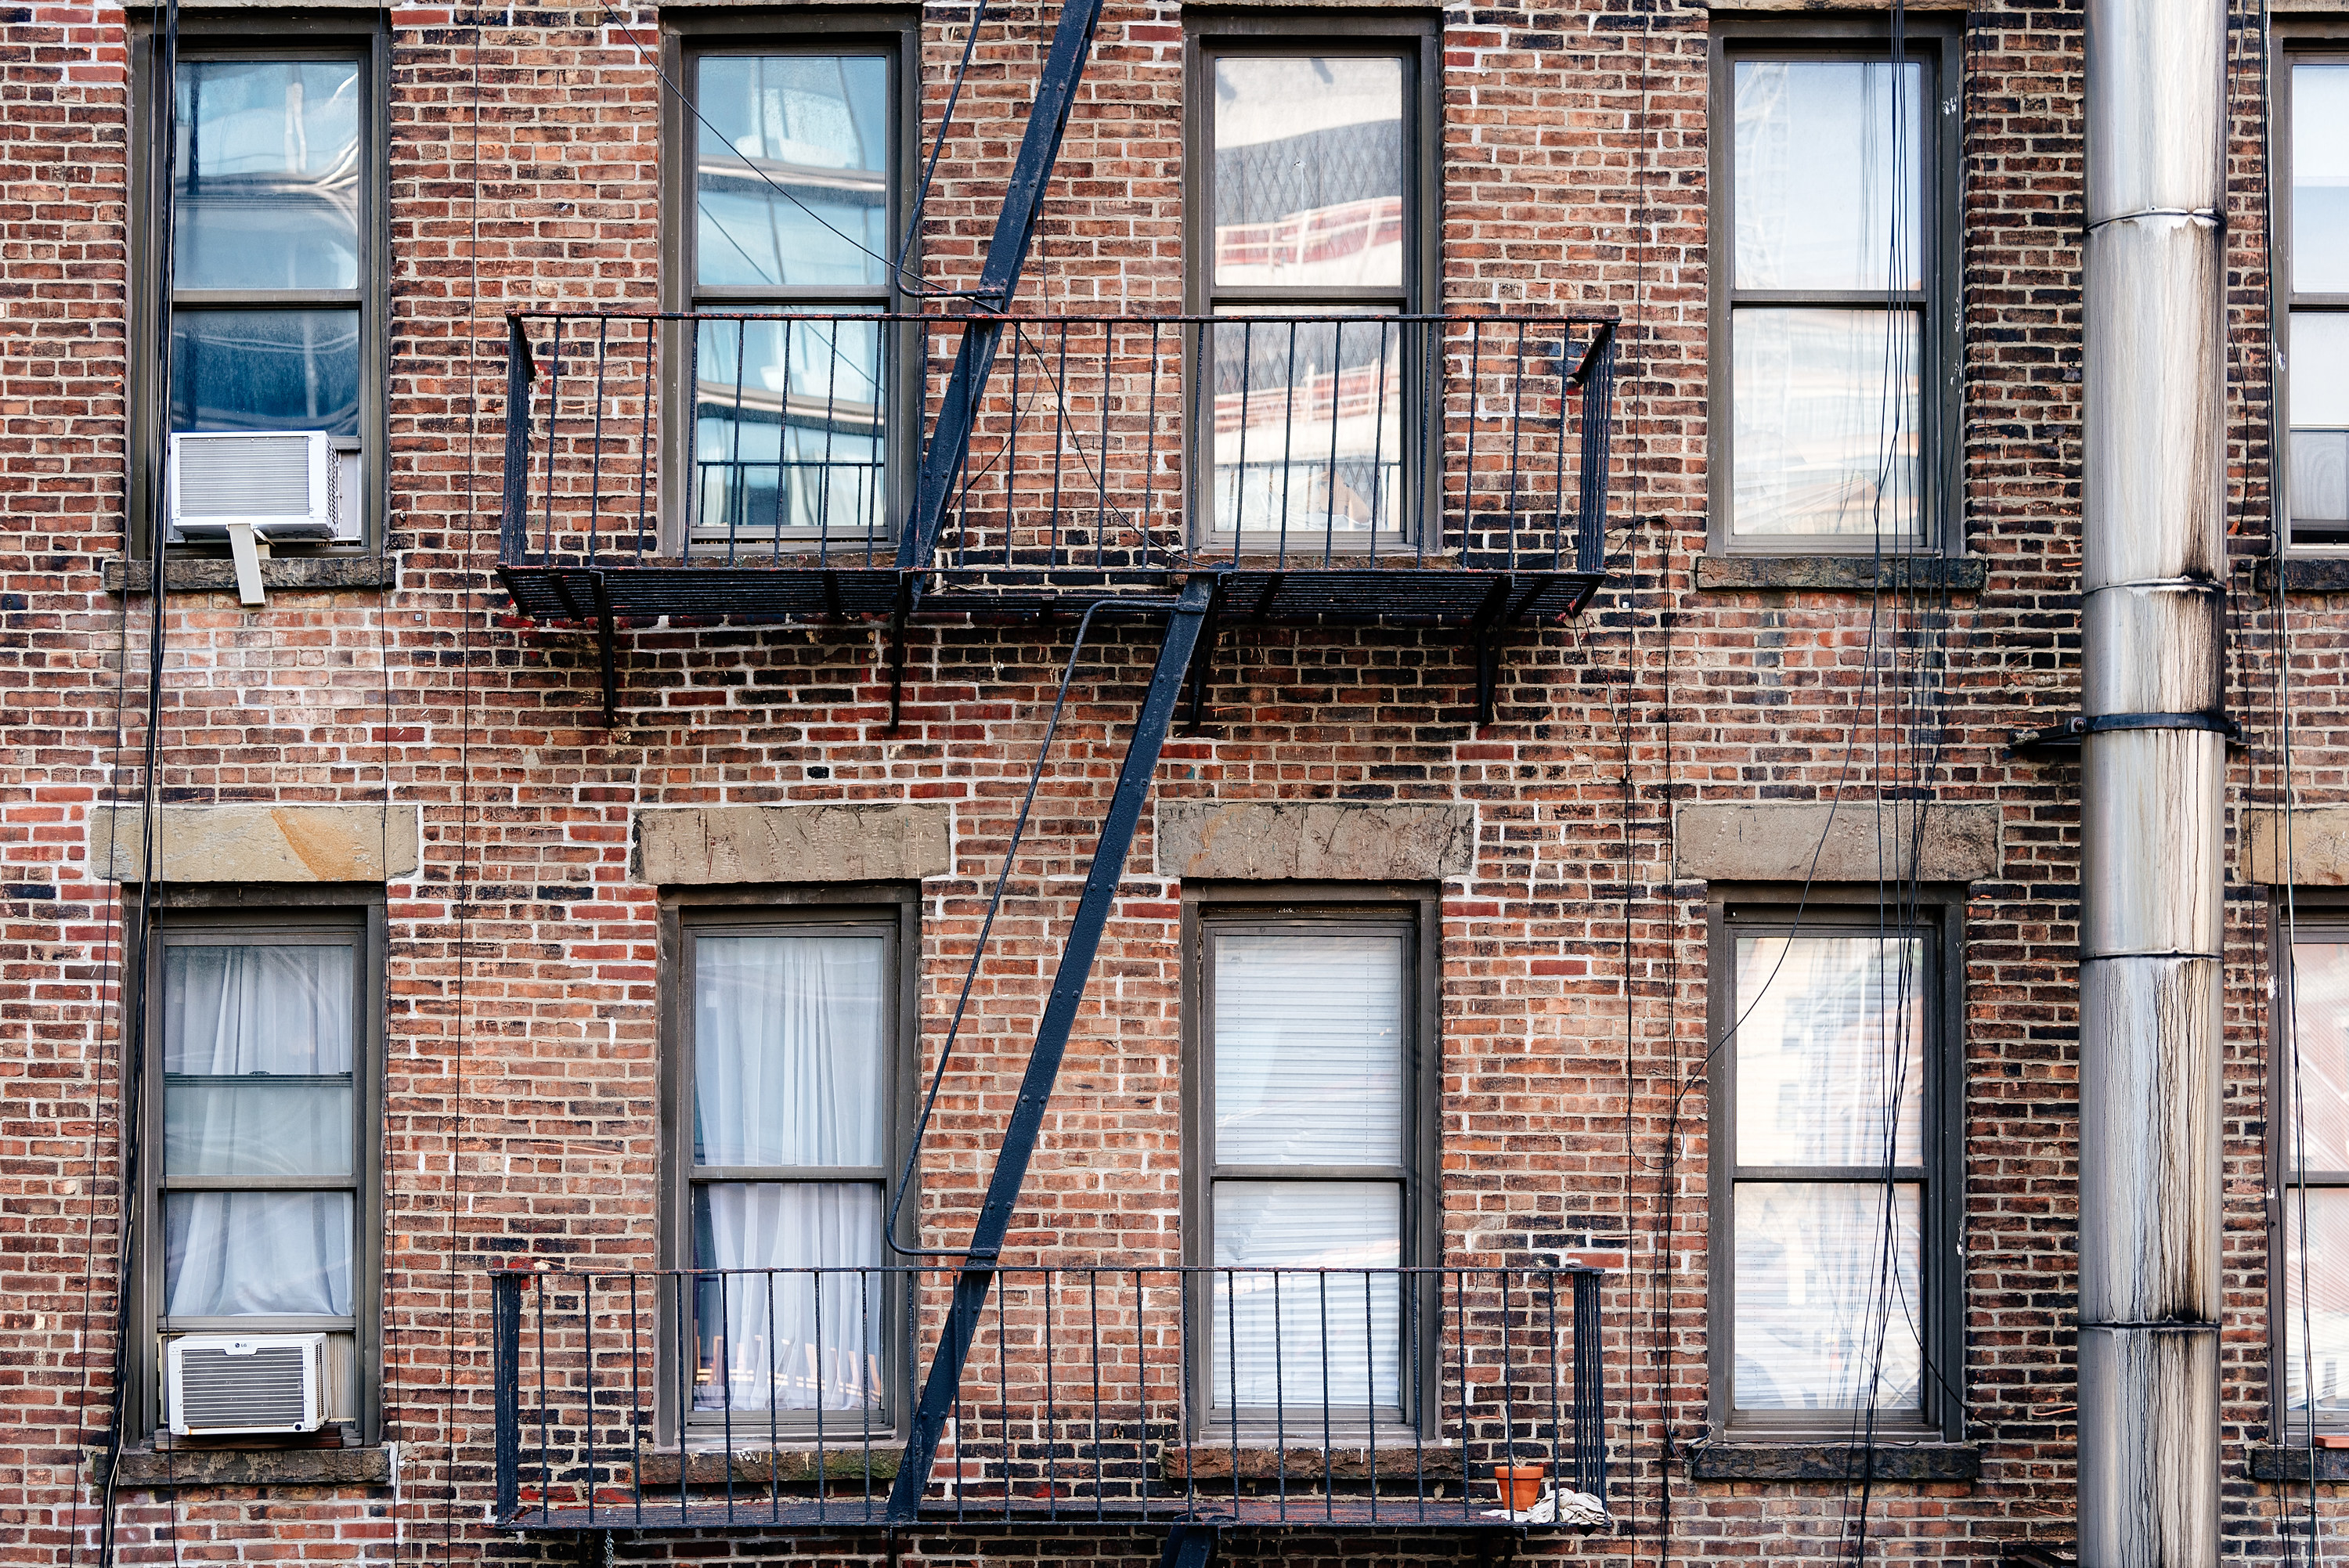 Two levels of a fire escape